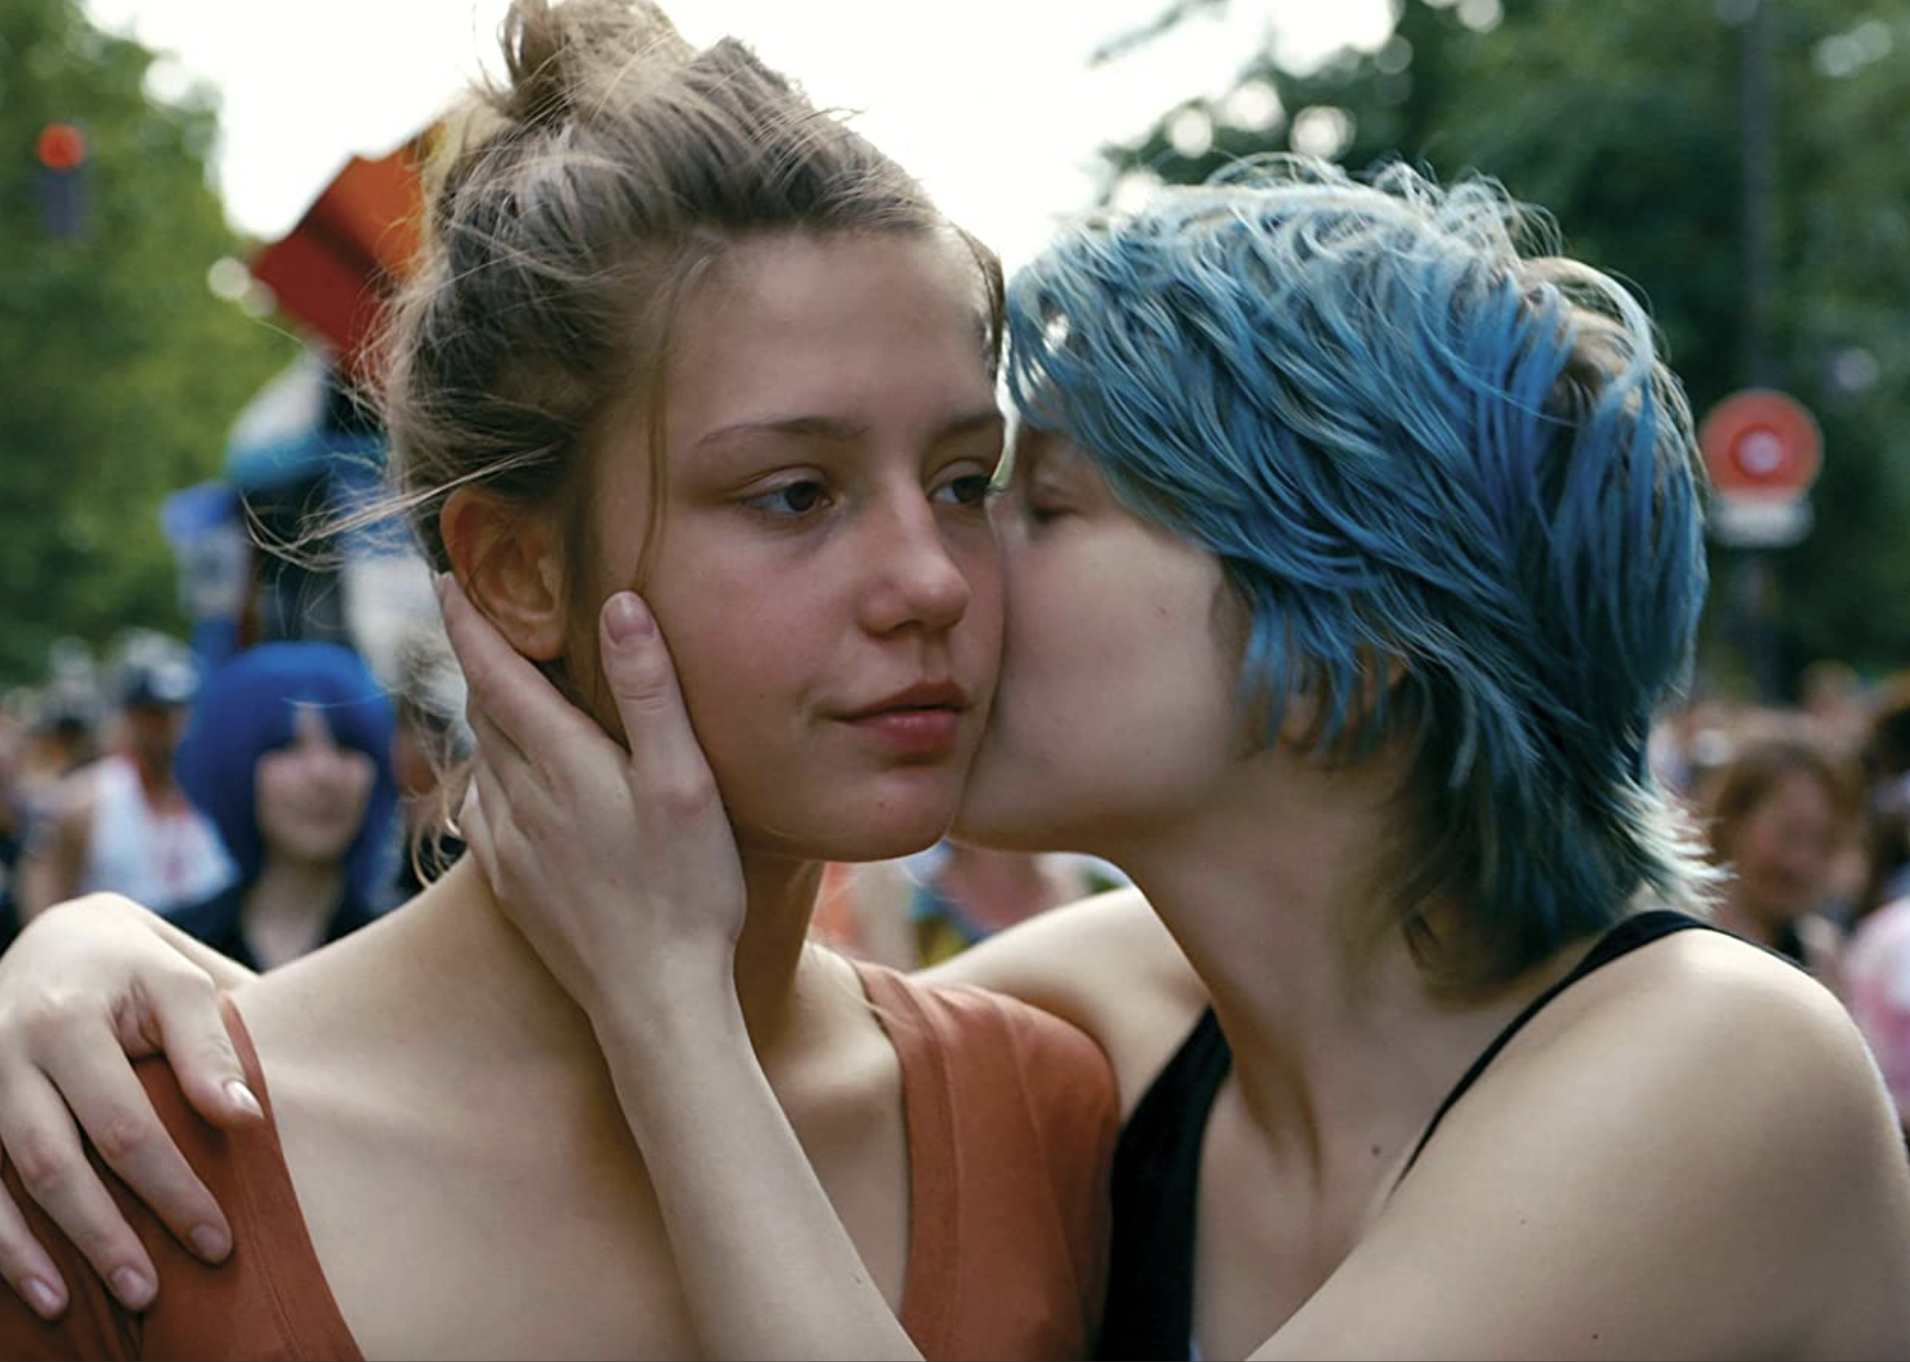 Léa Seydoux and Adèle Exarchopoulos in "Blue Is the Warmest Colour".